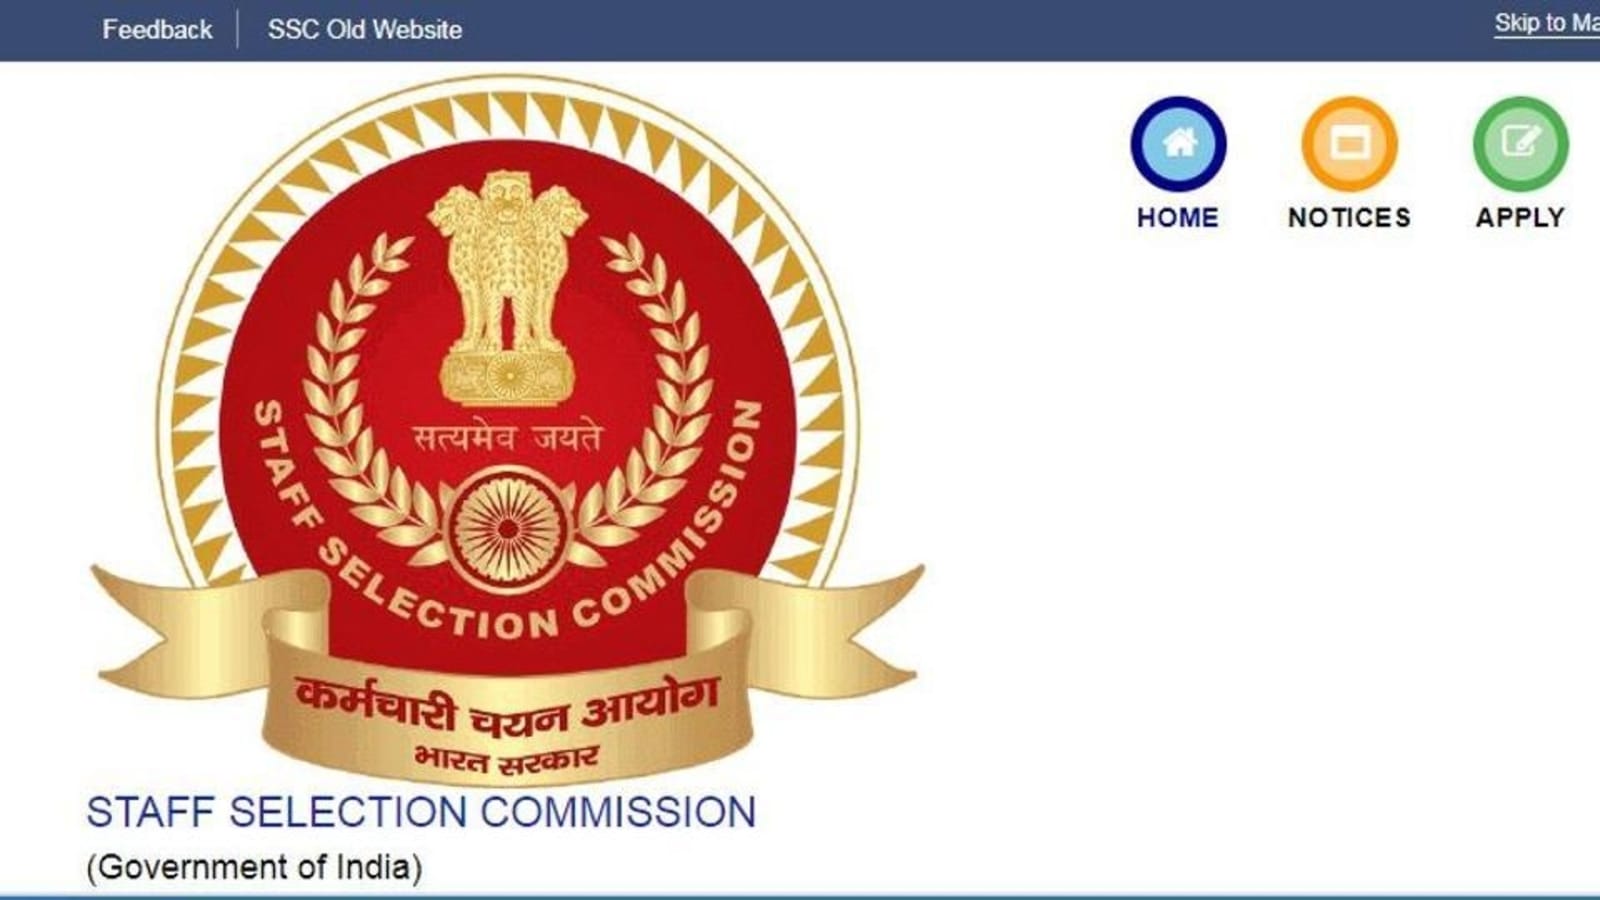 SSC CHSL Tier II Result 2020 declared, here’s direct link to check result